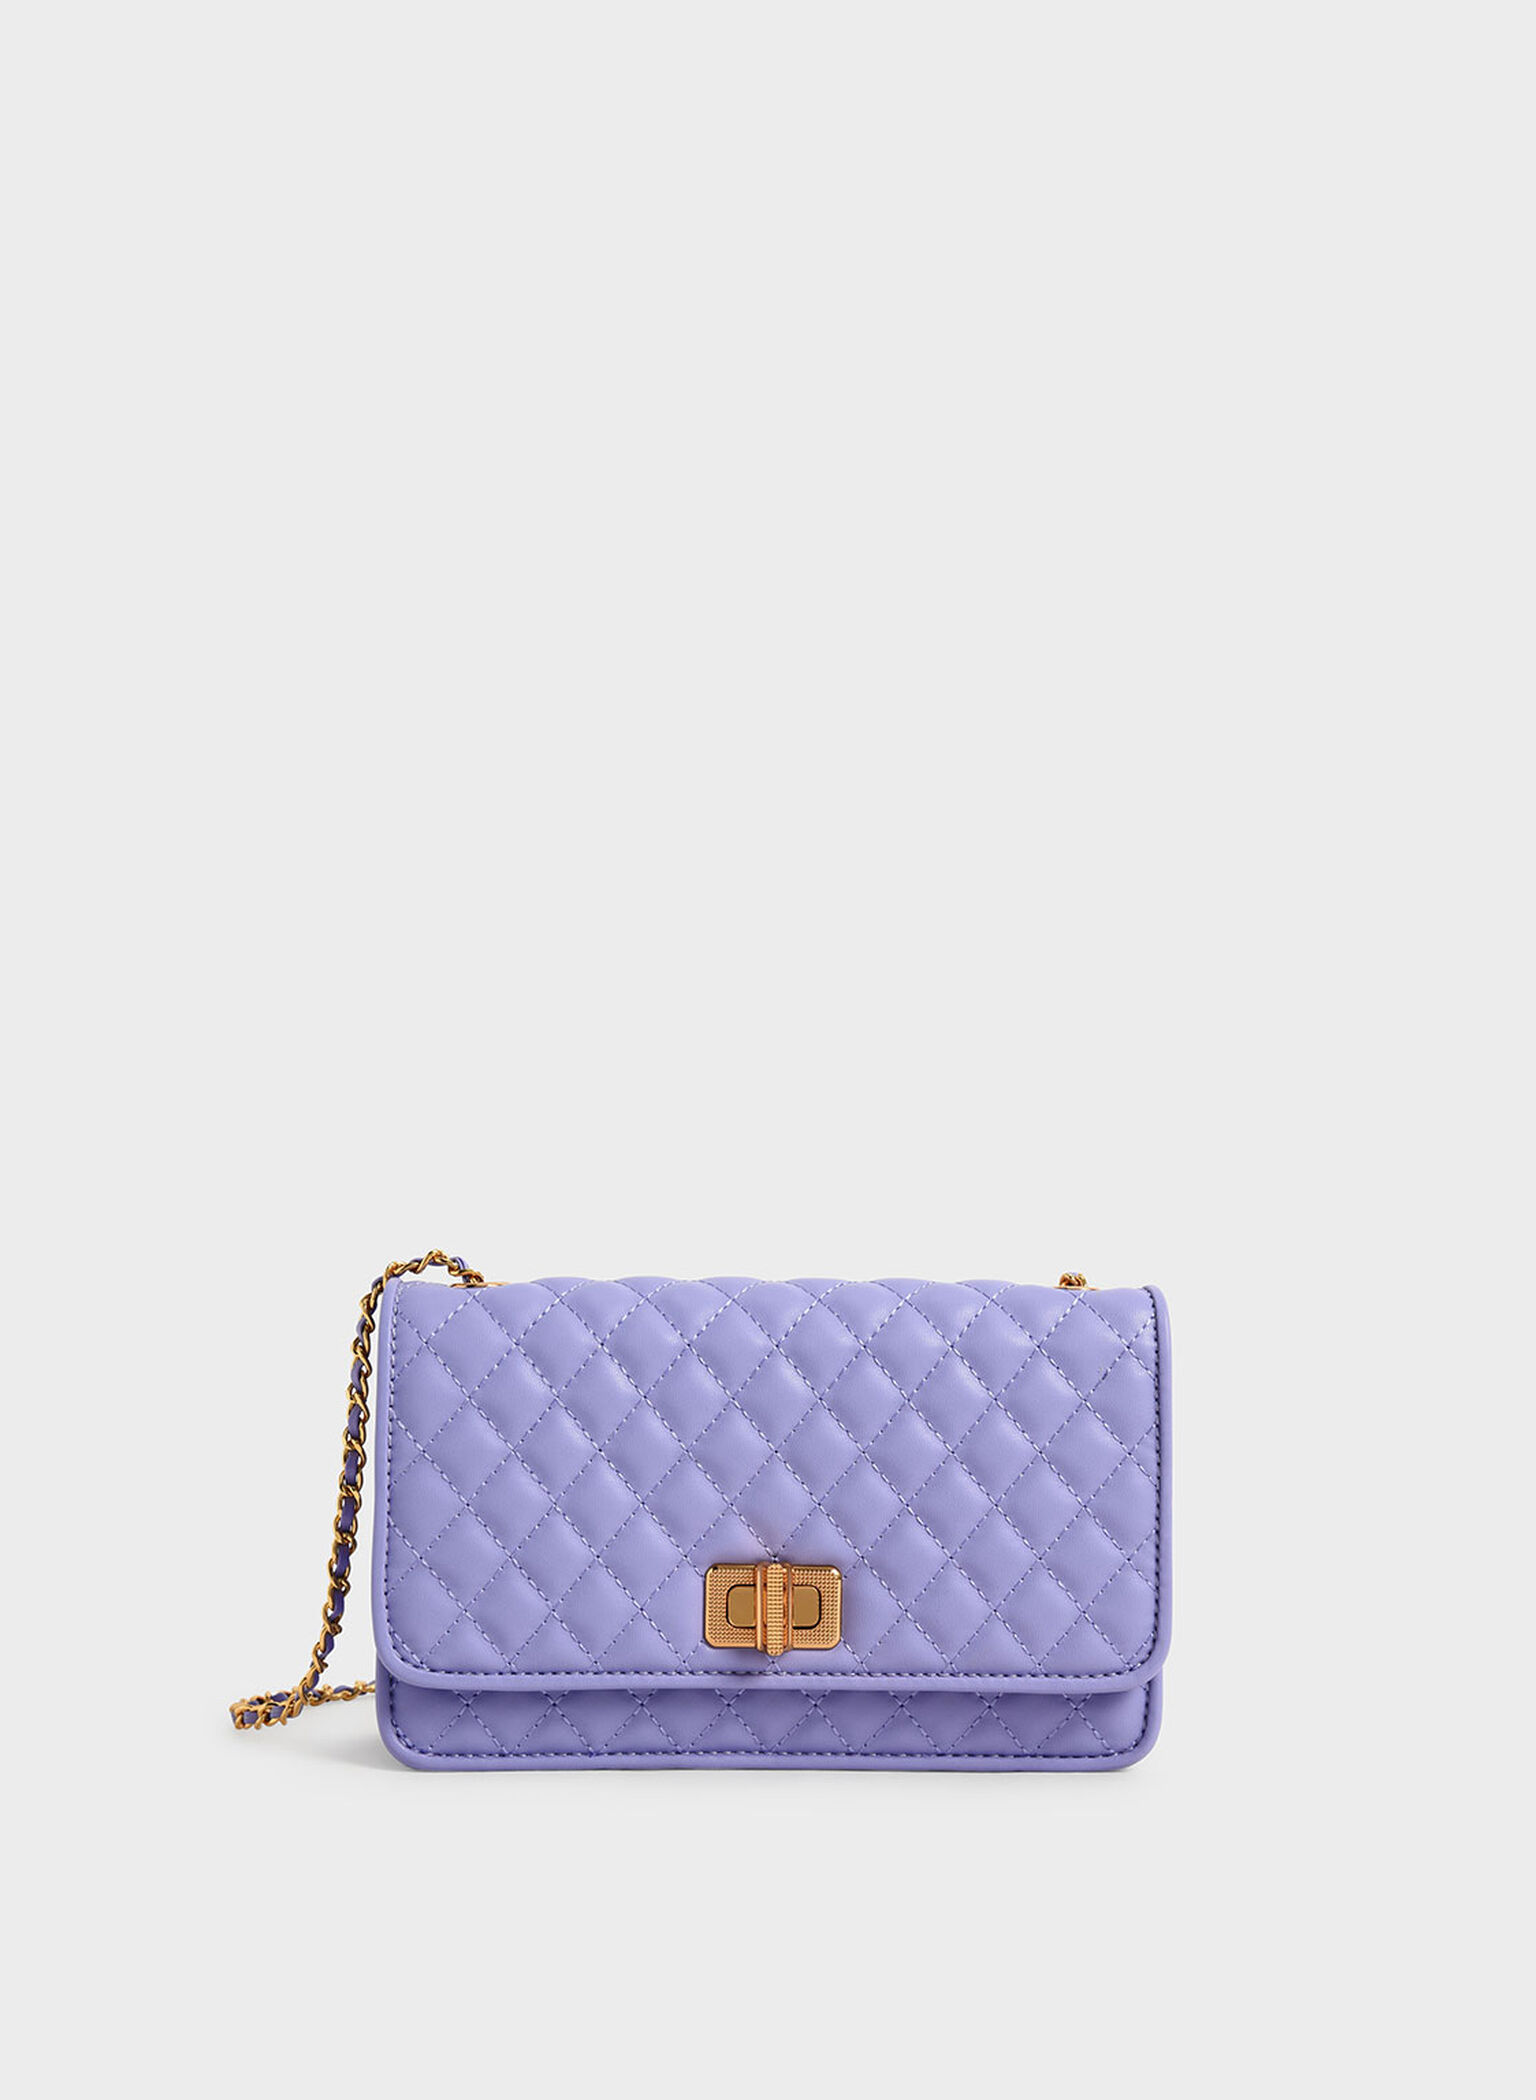 Charles & Keith - Women's Quilted Turn-Lock Evening Clutch, Lilac, S